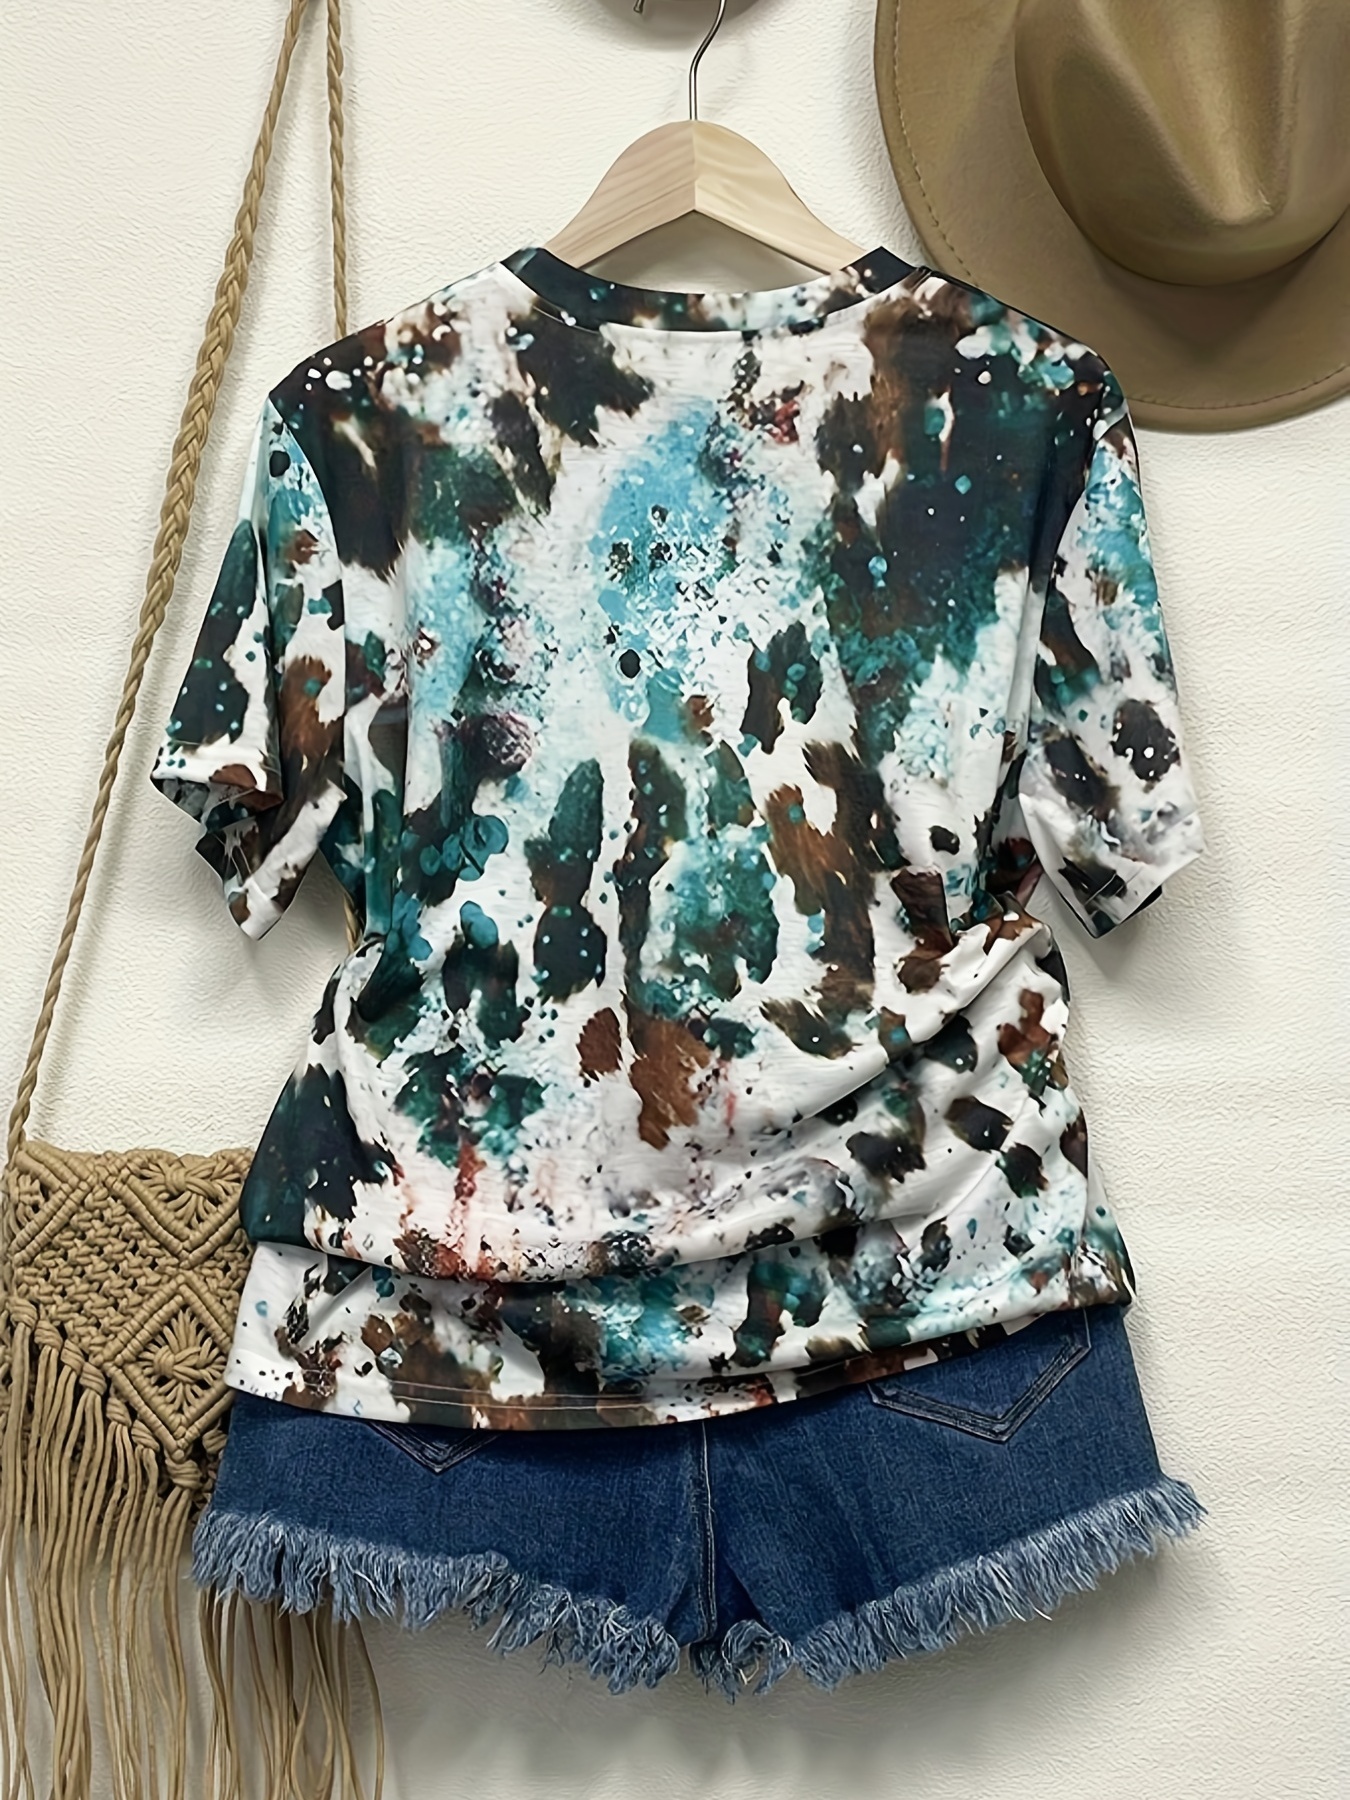 Cool and Collected Black Multi Tie-Dye Short Sleeve Tee